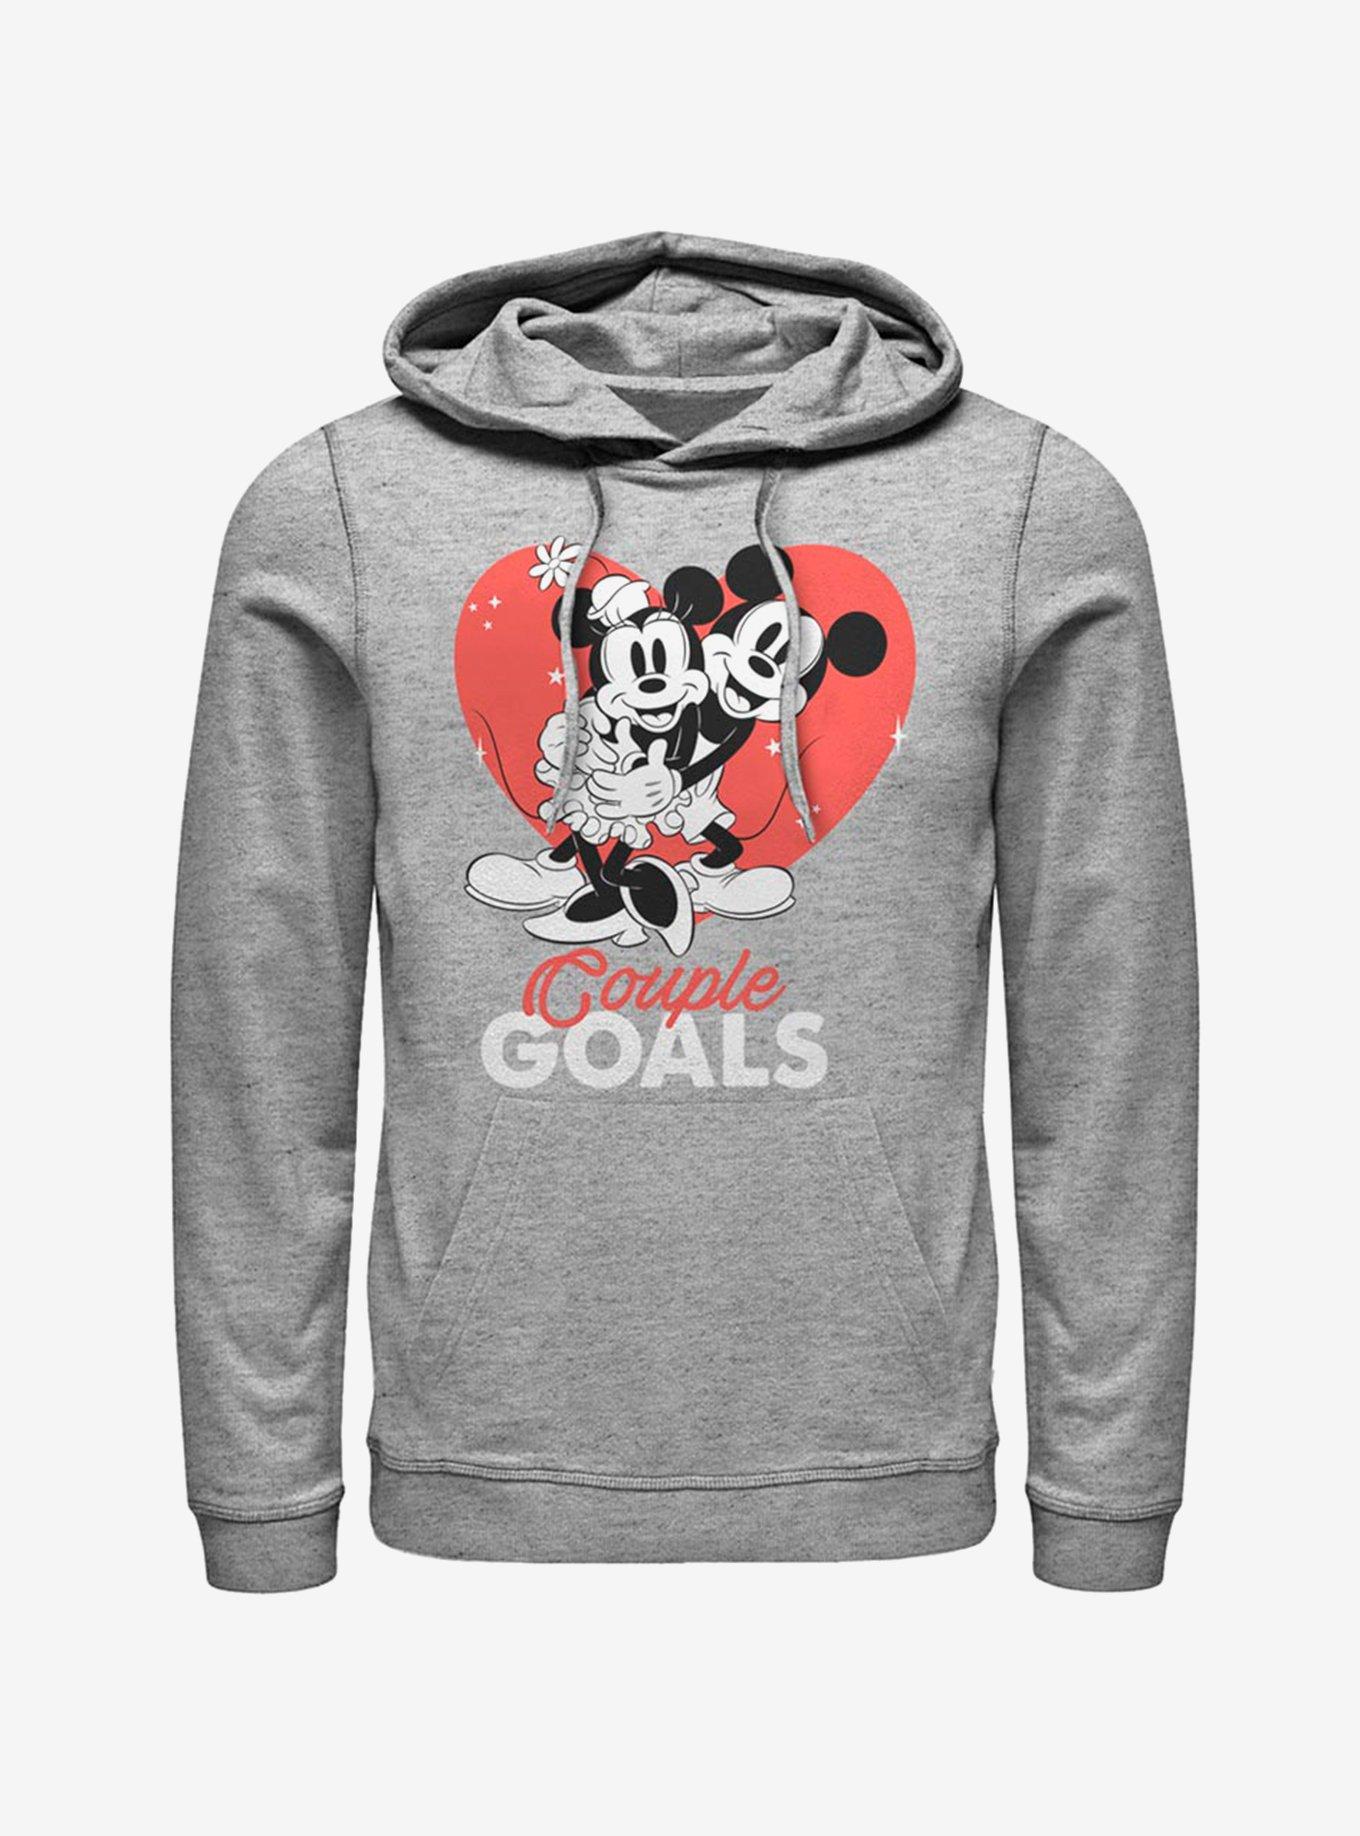 Disney Mickey Mouse & Minnie Mouse Couple Goals Hoodie, ATH HTR, hi-res